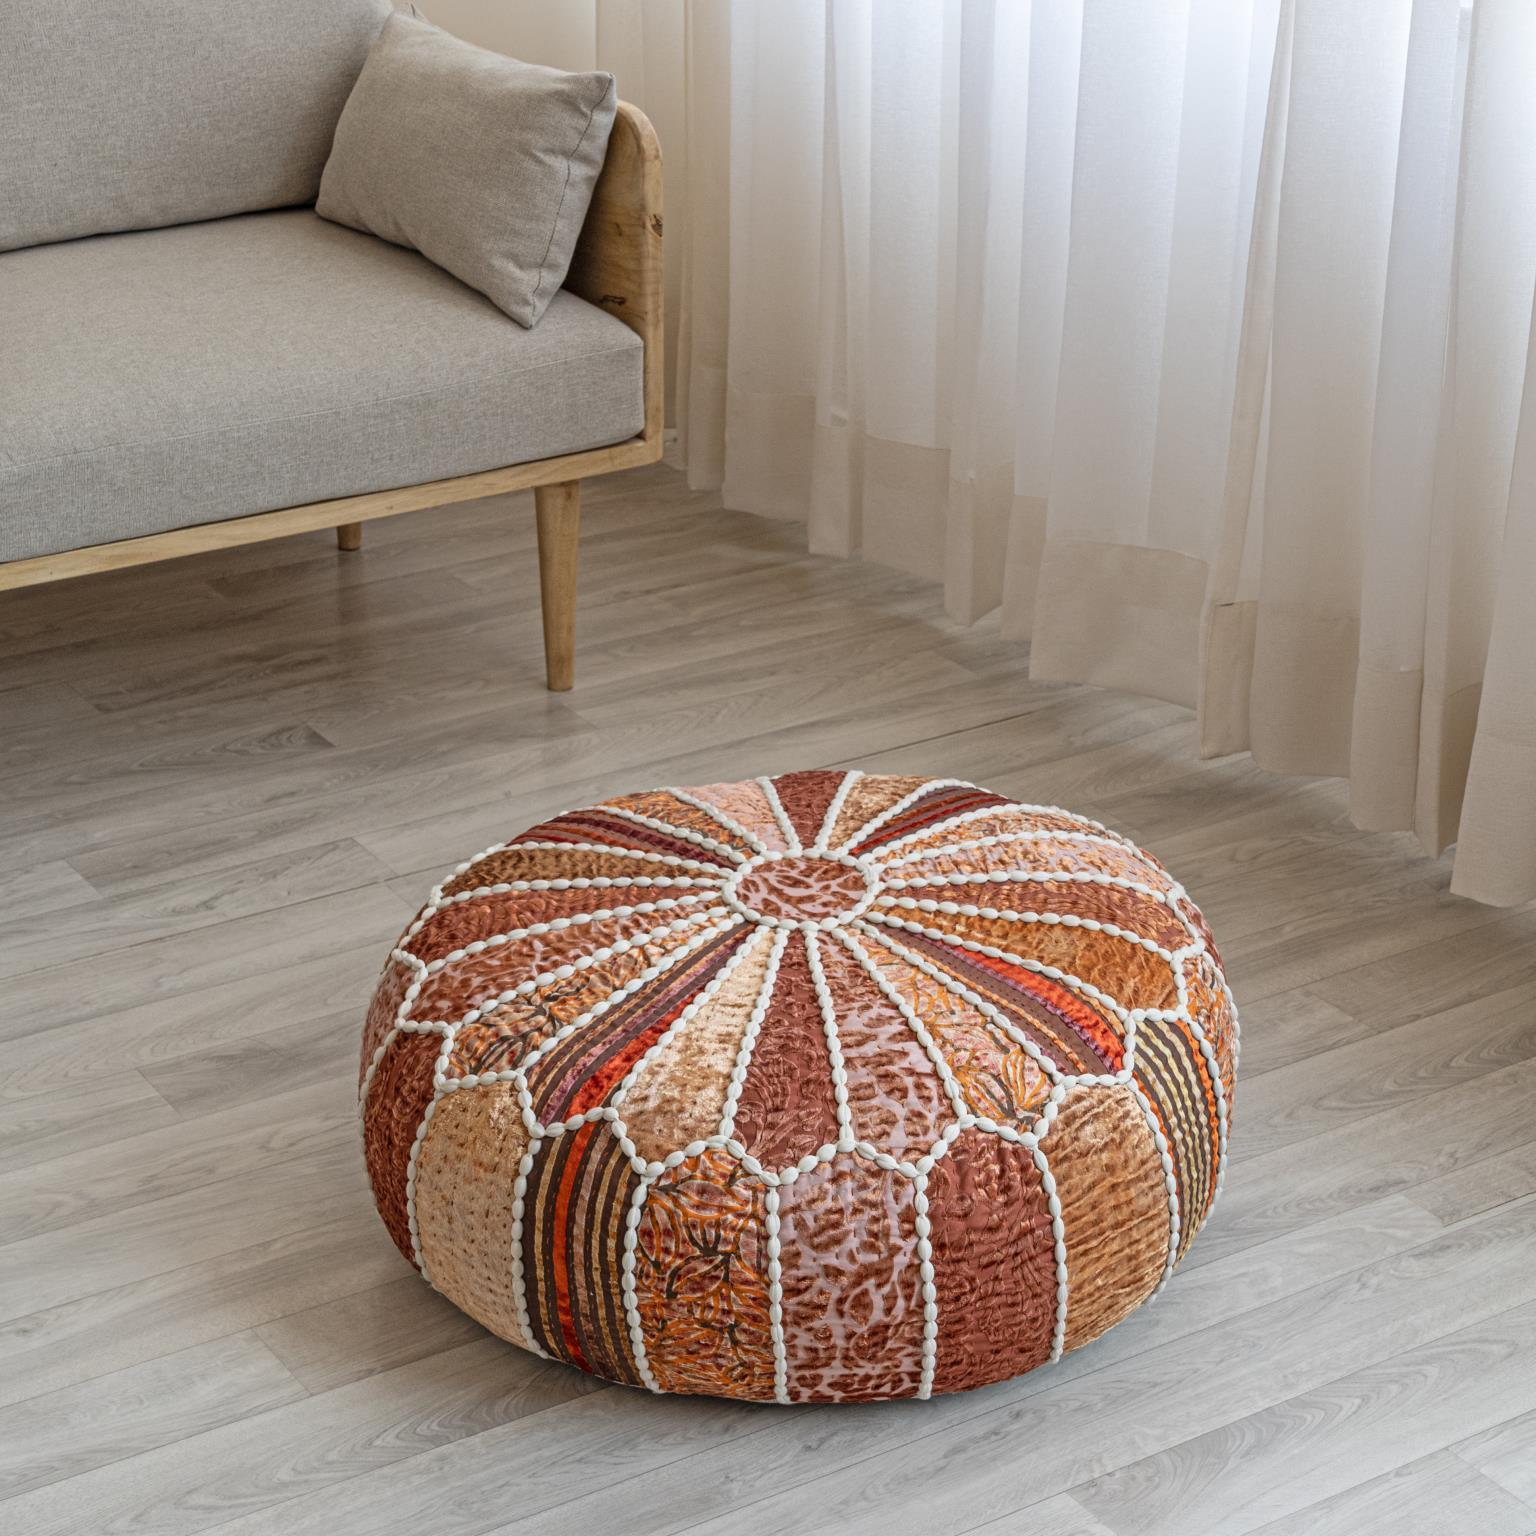 Contemporary Ottoman 1124 Round Pouf 718852653021 718852653021 in Red Fabric